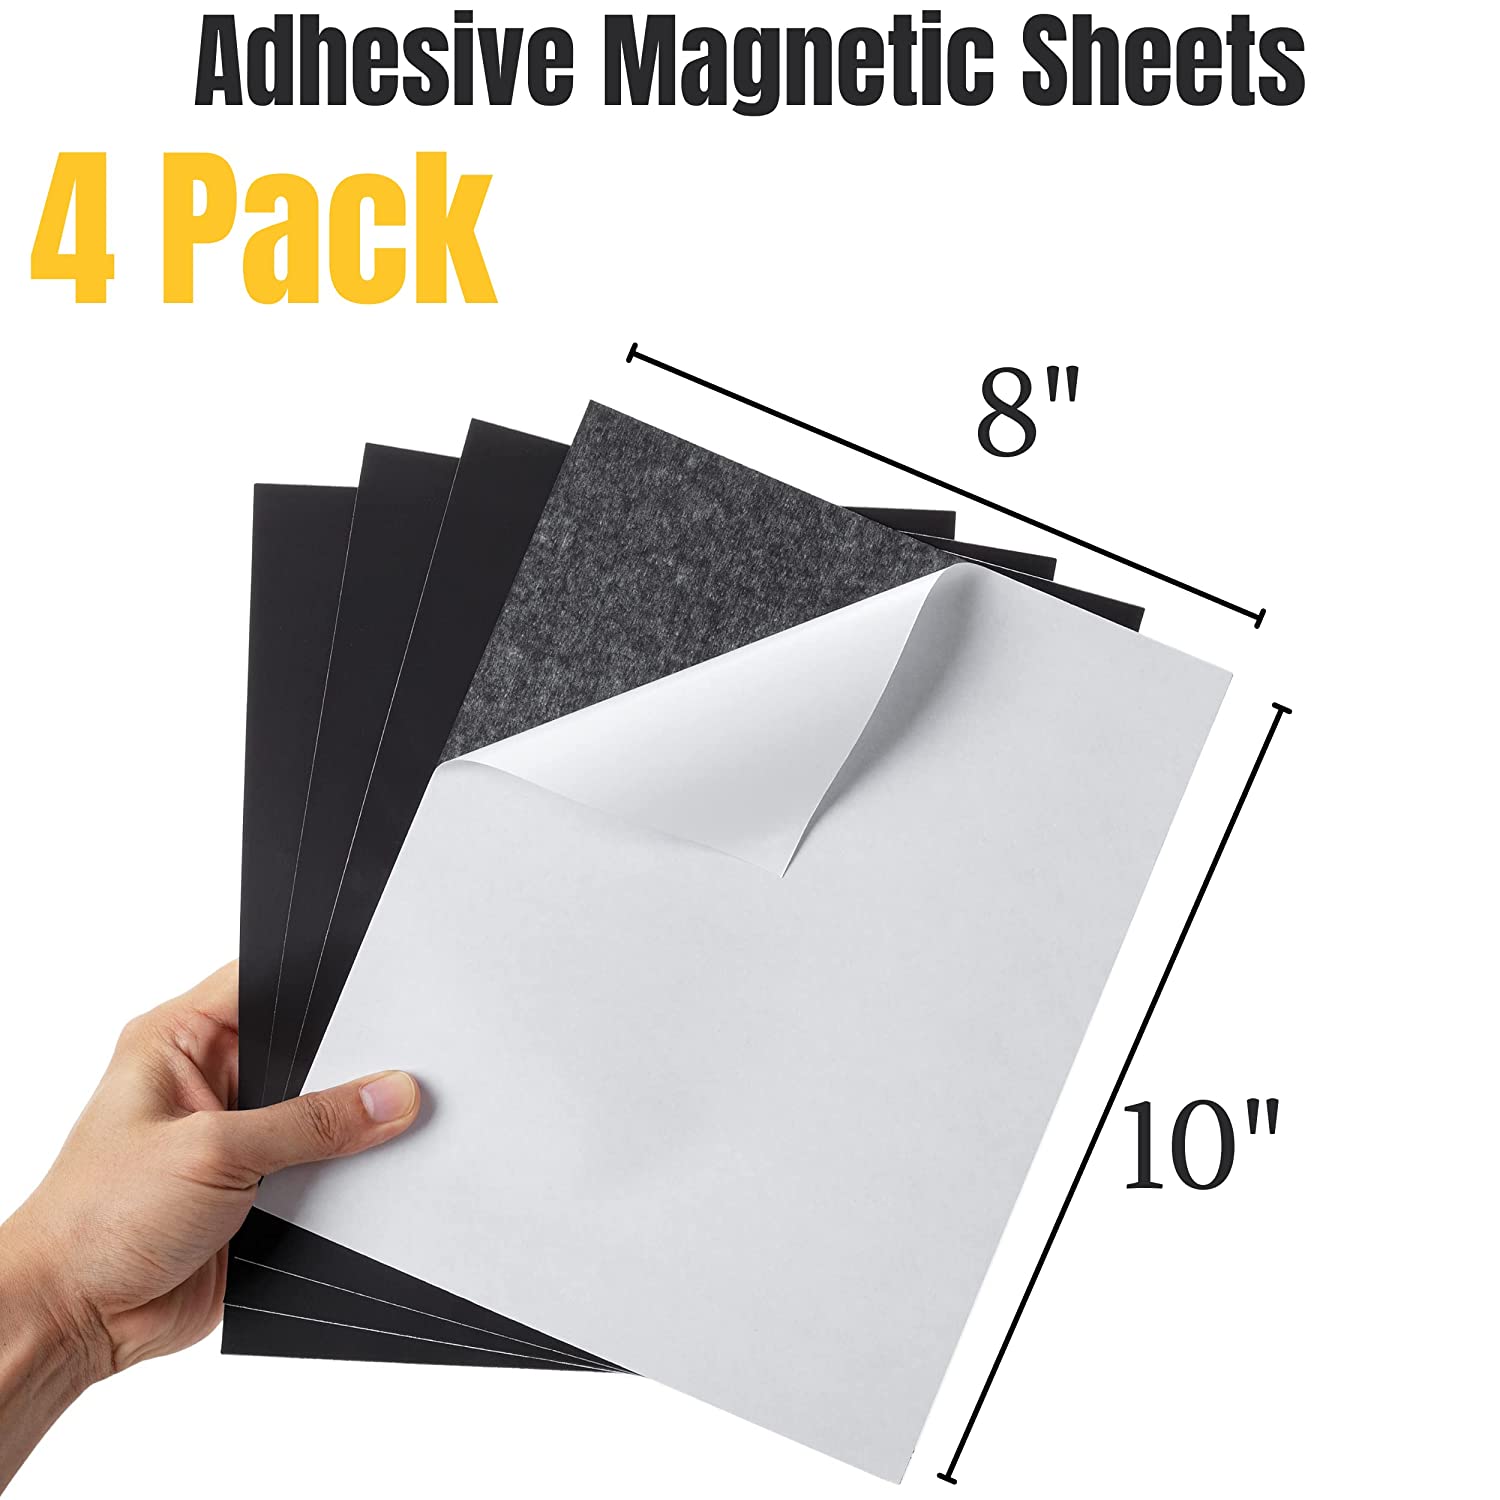 Mr. Pen- Adhesive Magnetic Sheets, 8 x 10, 4 Pack, Magnetic